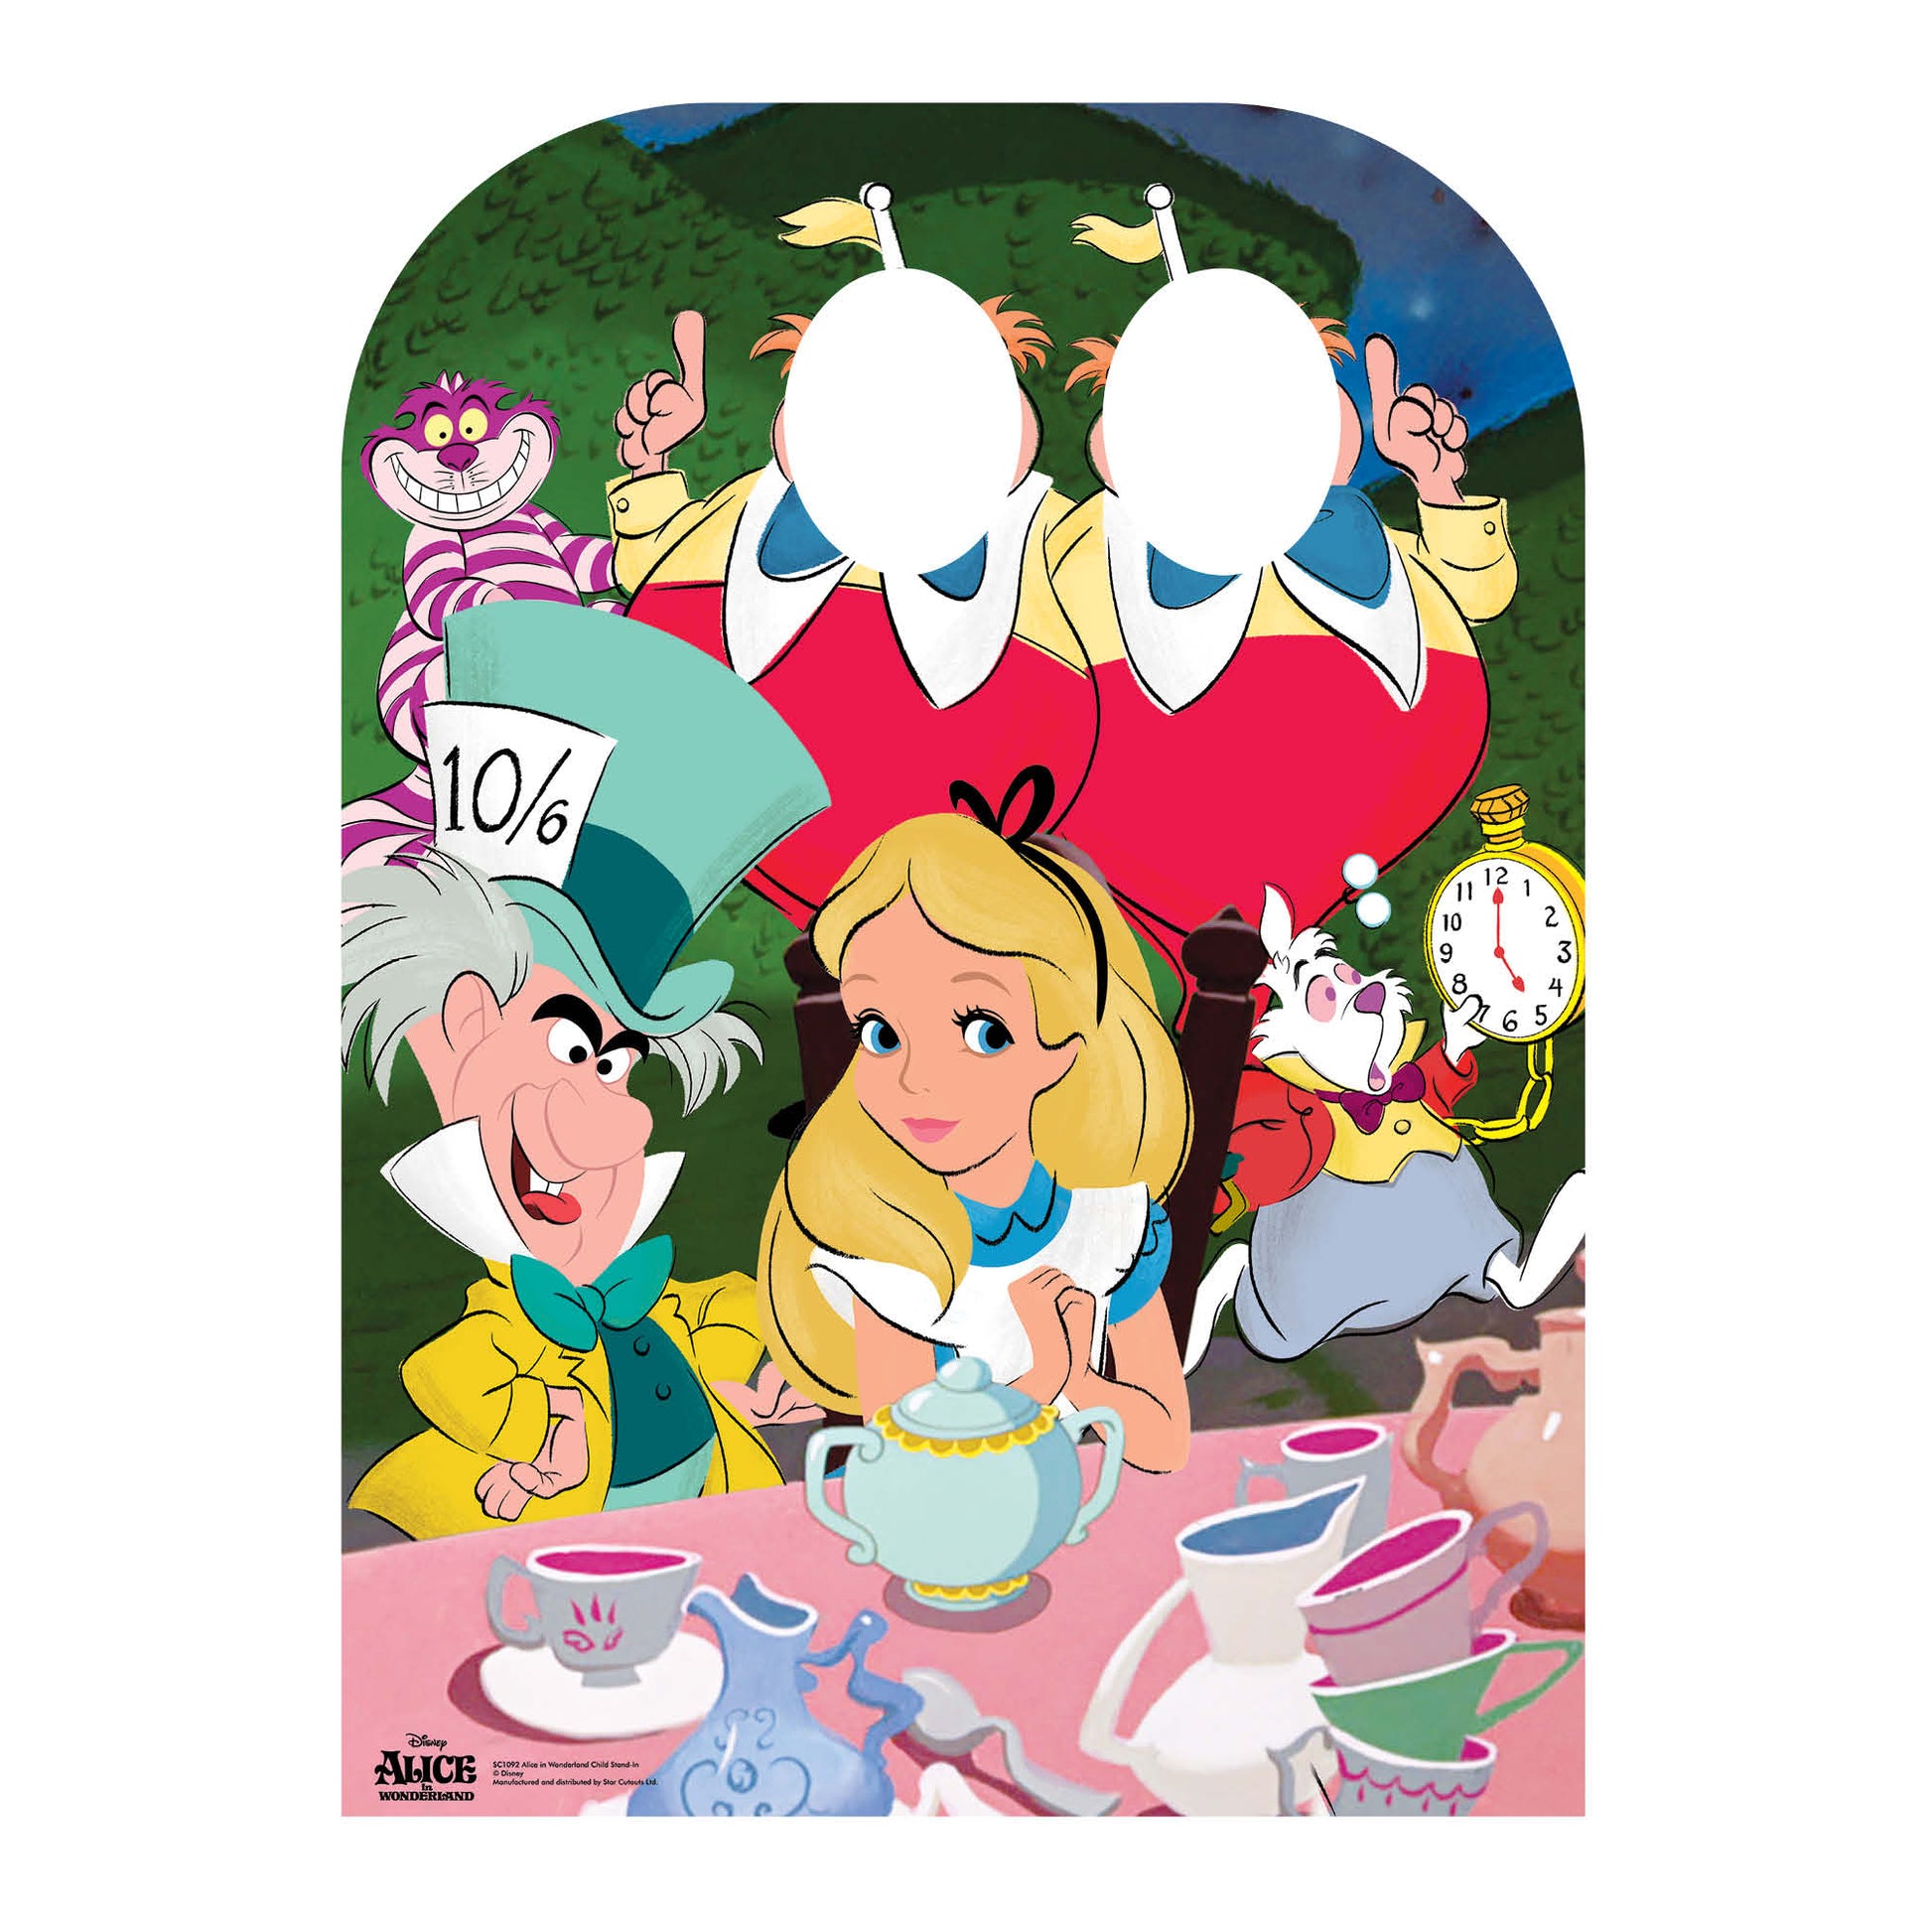 SC1092 Alice in Wonderland Tea Party Child Stand-in Cardboard Cut Out Height 131cm - Star Cutouts